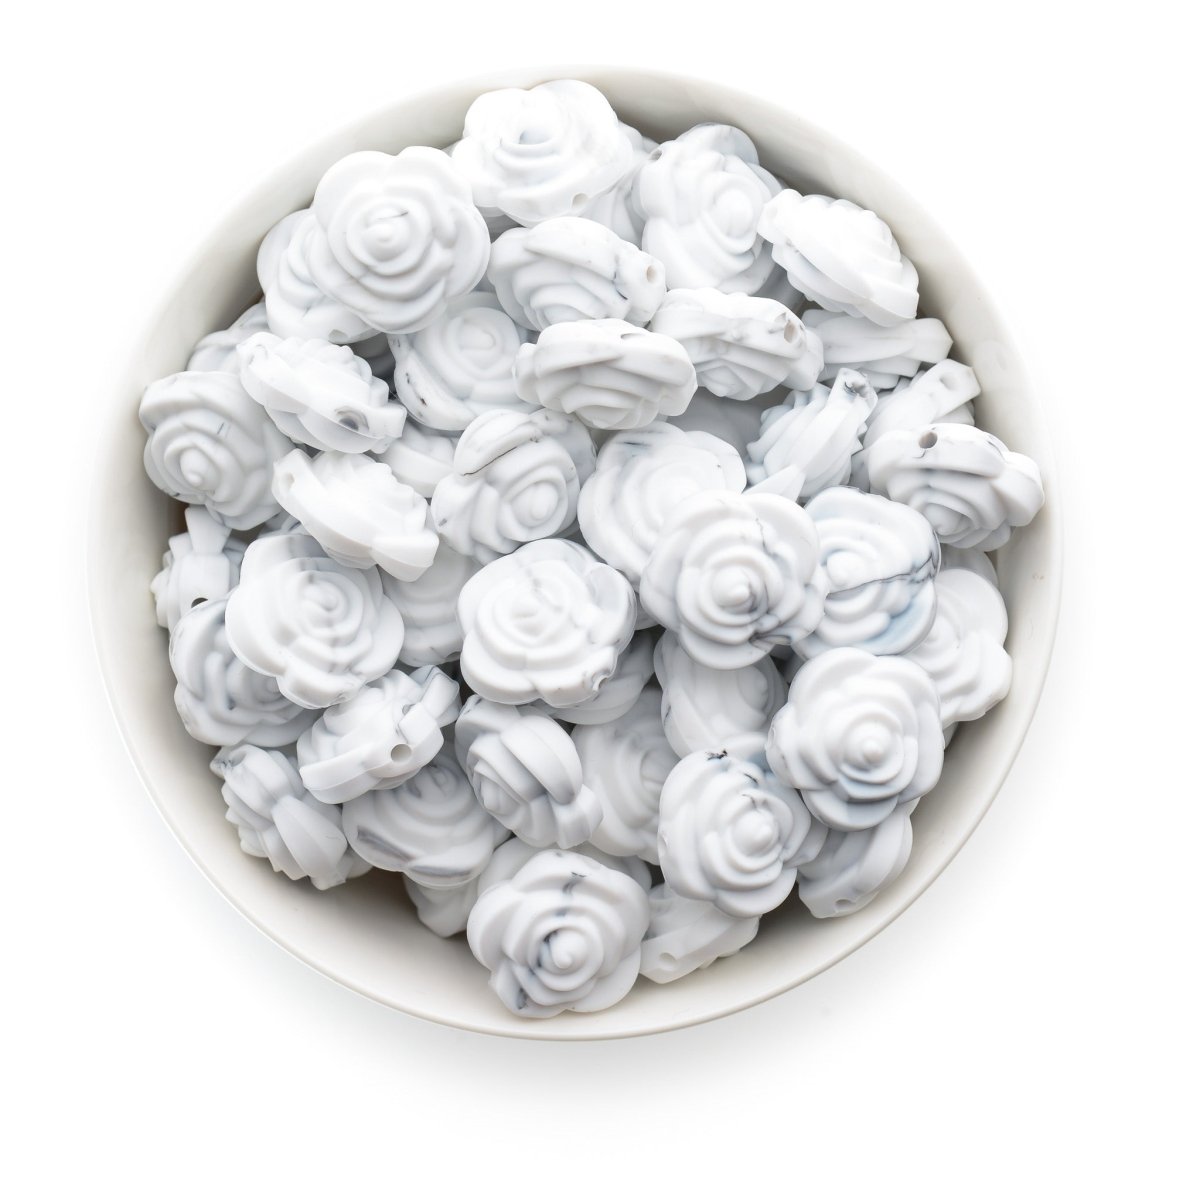 Silicone Focal Beads Roses White Marble from Cara & Co Craft Supply